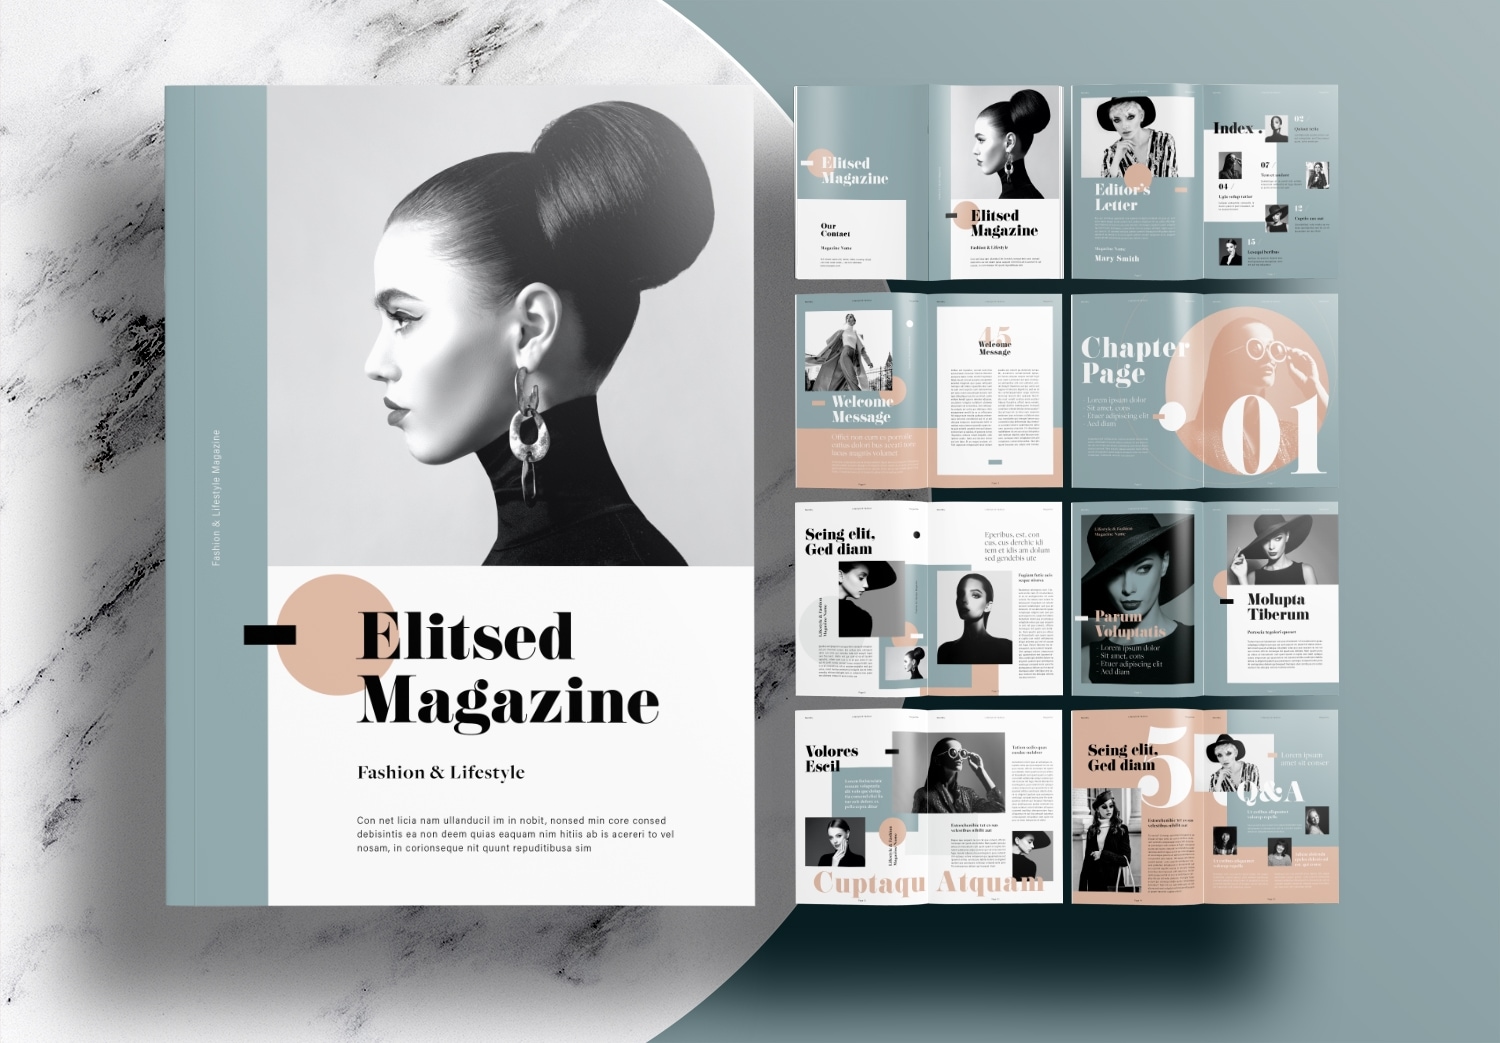 Free InDesign Magazine Template Unsell.Design InDesign